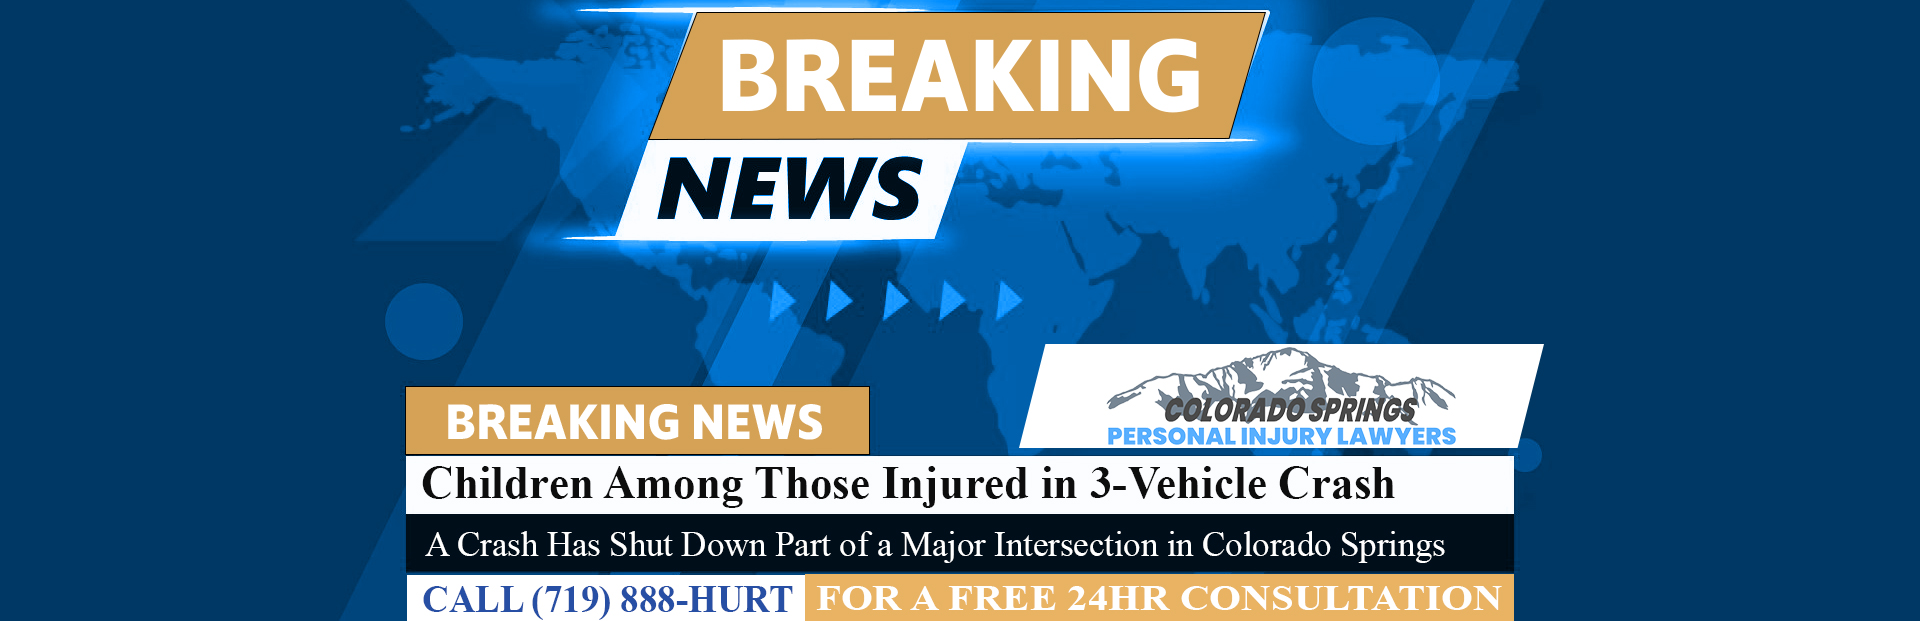 [09-15-23] Children Among Those Injured in 3-Vehicle Crash in Colorado Springs Thursday